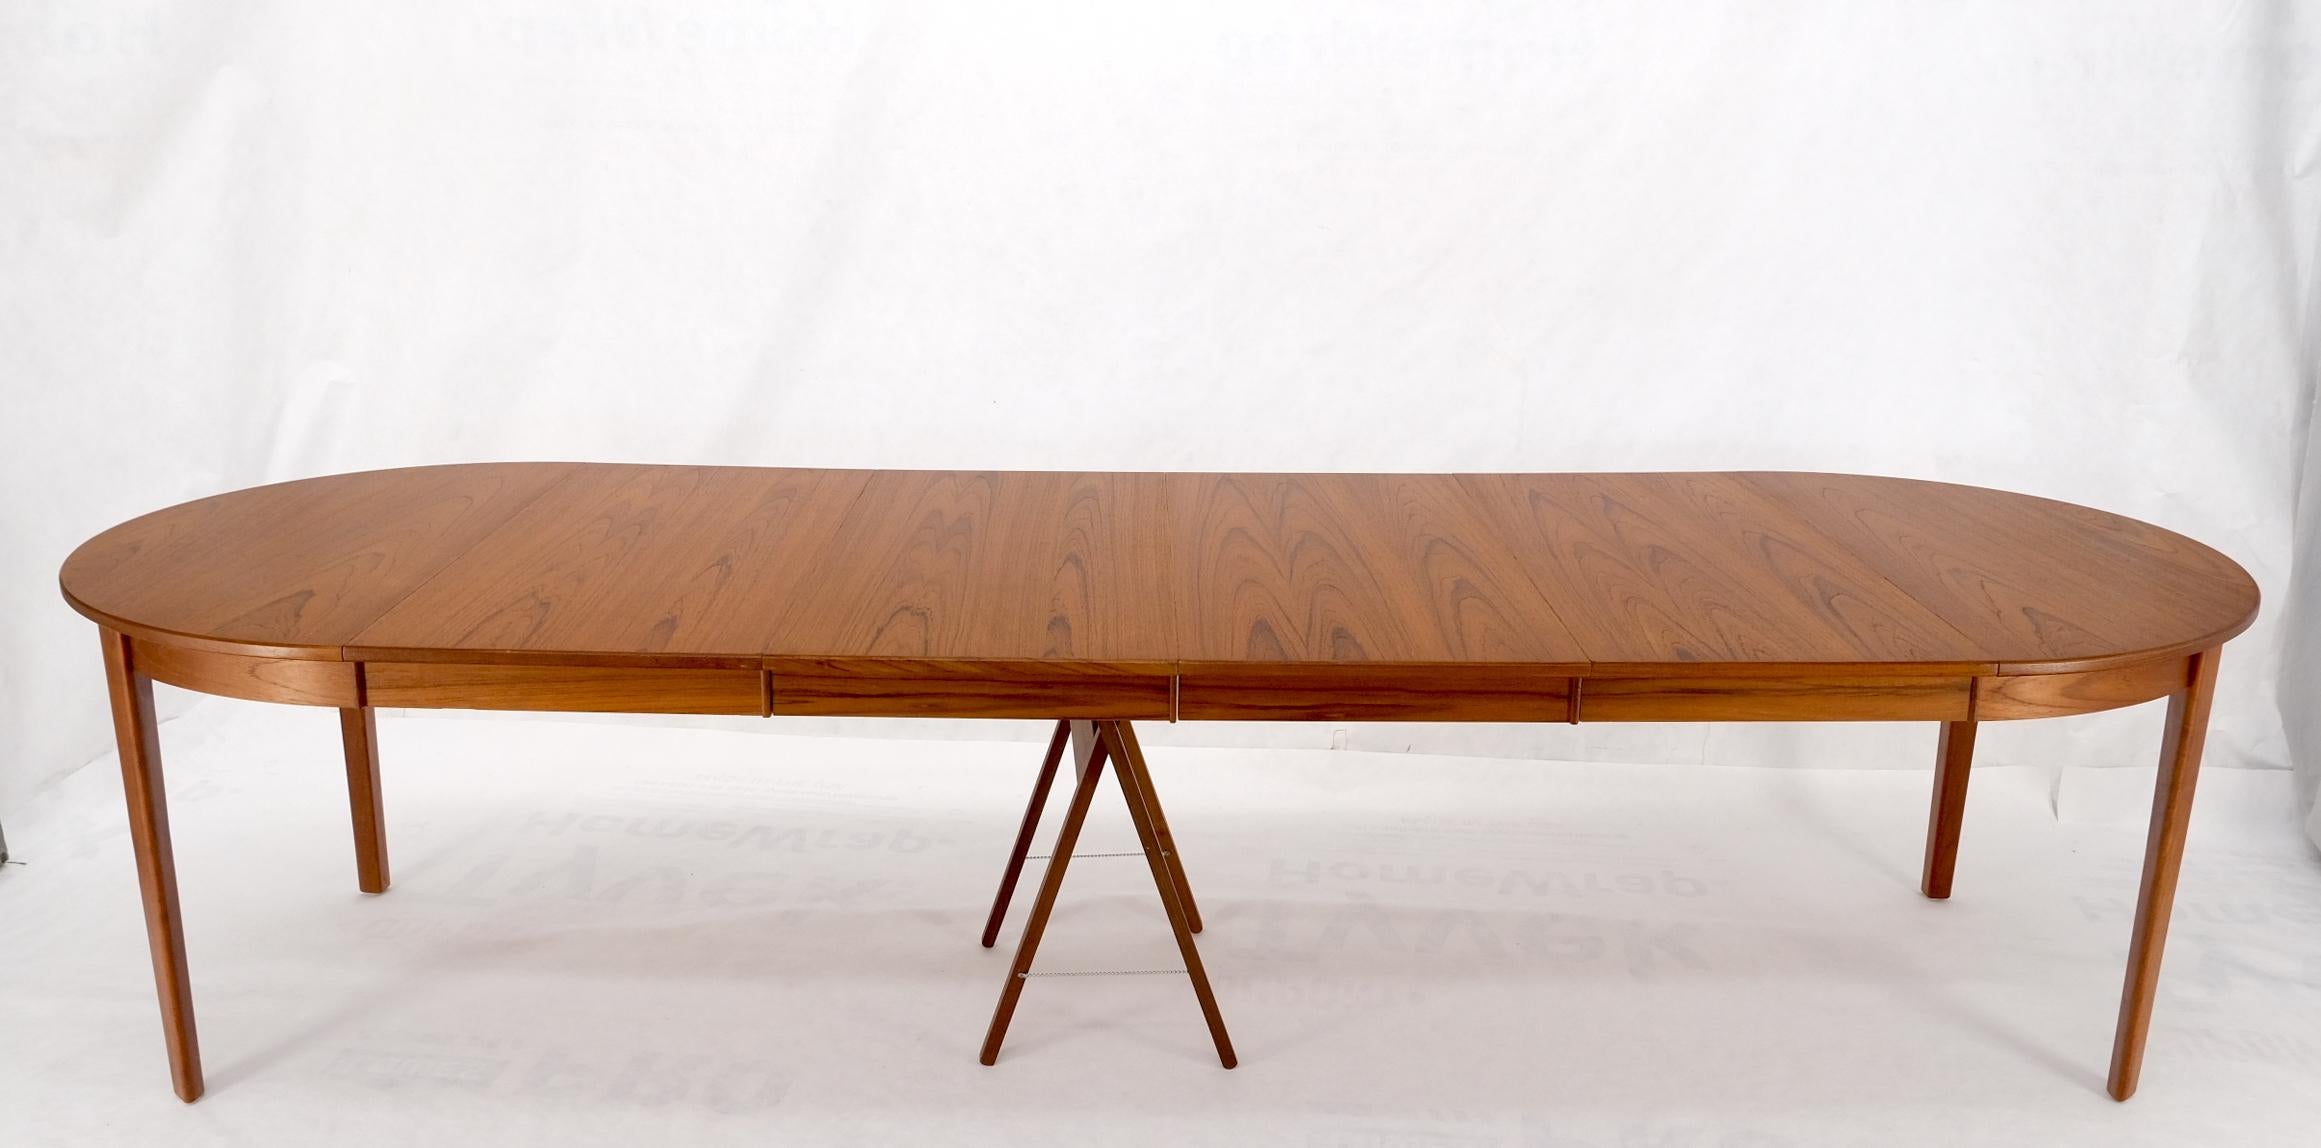 Danish Teak Mid Century Modern Round Dining Banquet Conference Table 4 Leaf MINT For Sale 9